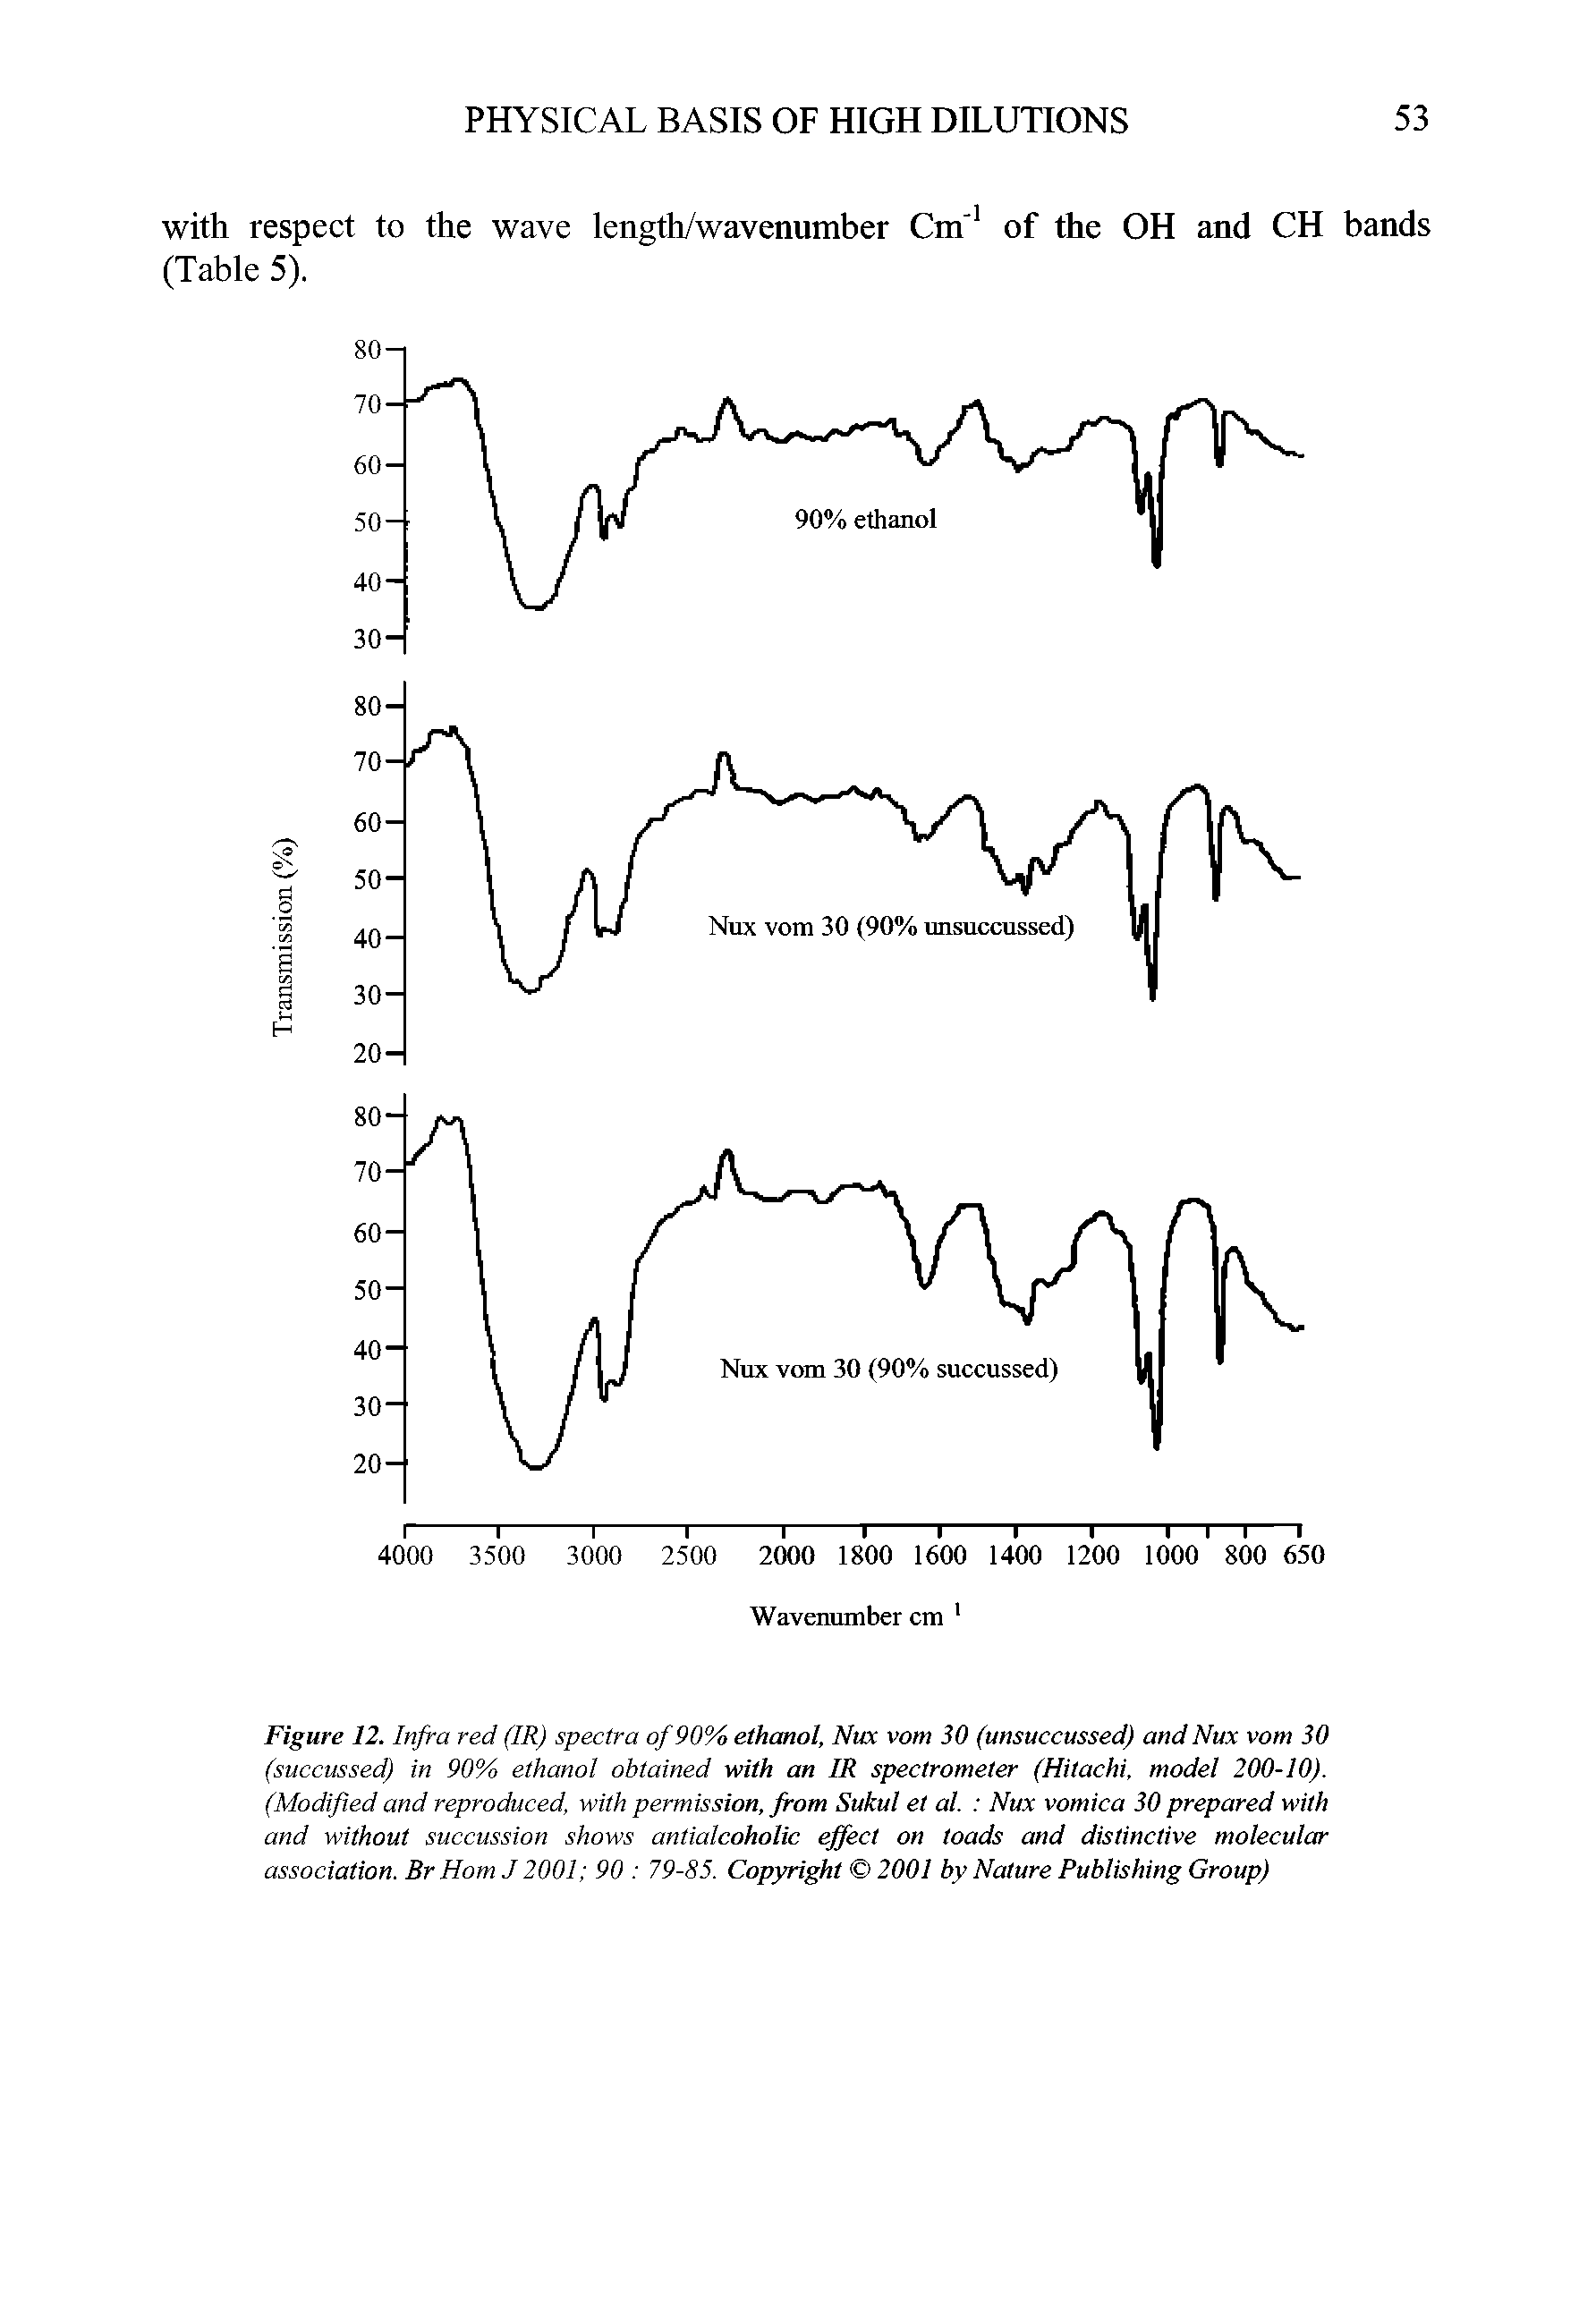 Figure 12. Infra red (IR) spectra of 90% ethanol, Nux vom SO (unsuccussed) and Nux vom SO (succussed) in 90% ethanol obtained with an IR spectrometer (Hitachi, model 200-10). (Modified and reproduced, with permission, from Sukul et al. Nux vomica SO prepared with and without succussion shows antialcoholic effect on toads and distinctive molecular association. Br Horn J 2001 90 79-85. Copyright 2001 by Nature Publishing Group)...